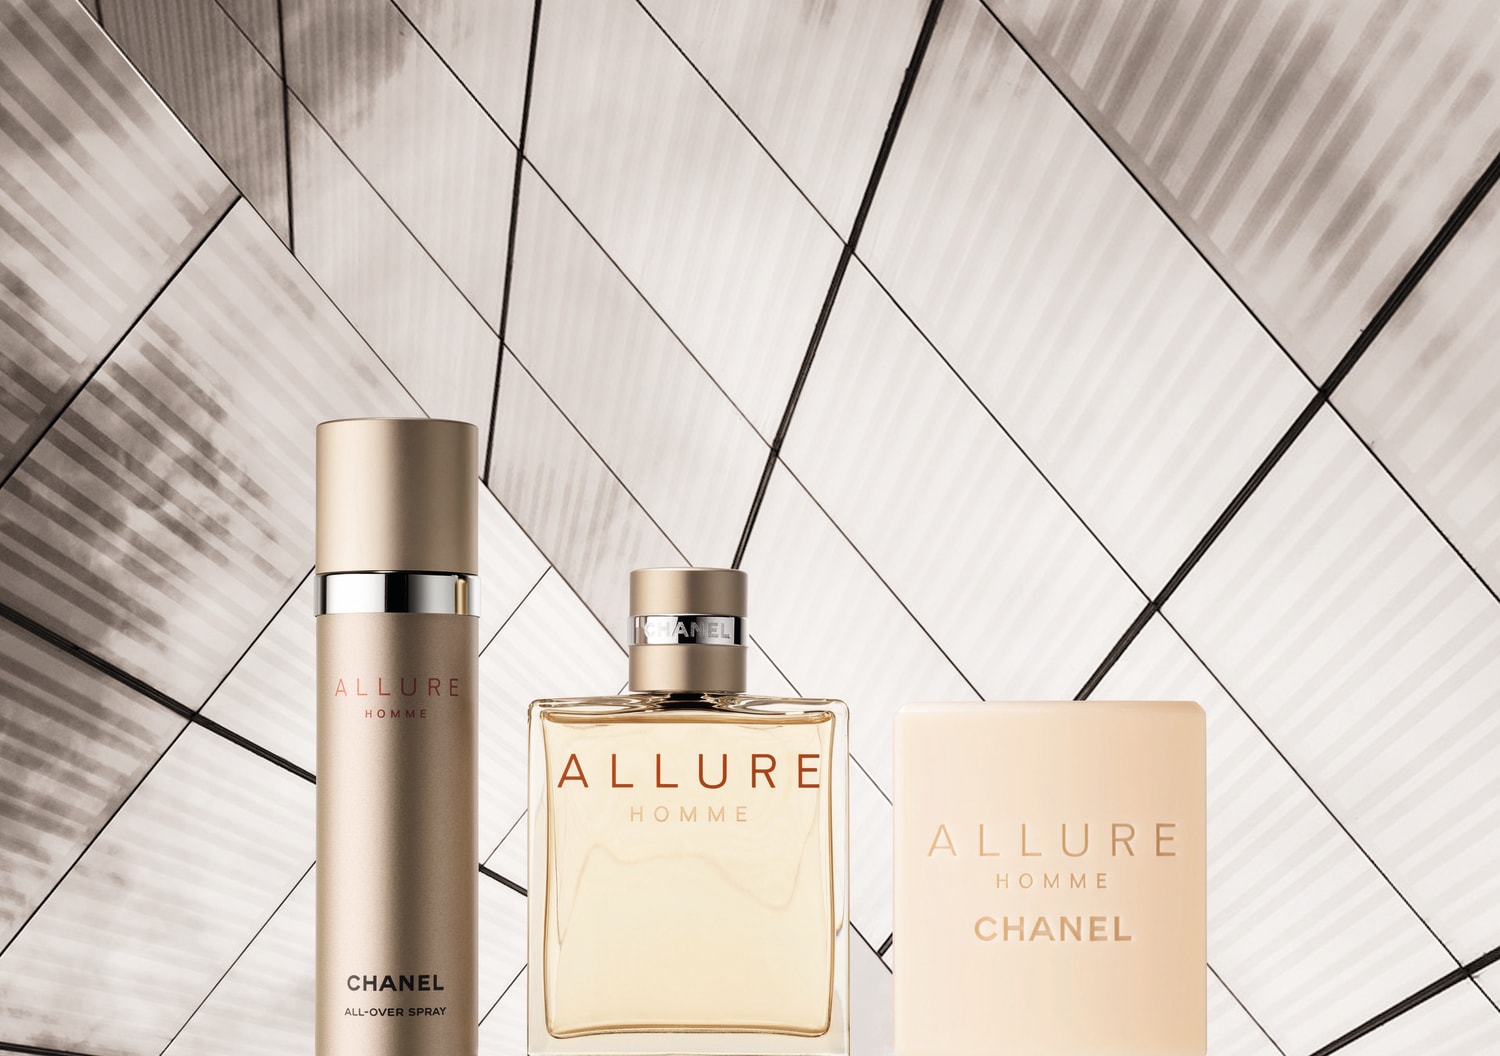 Chanel Allure Homme All-Over Spray